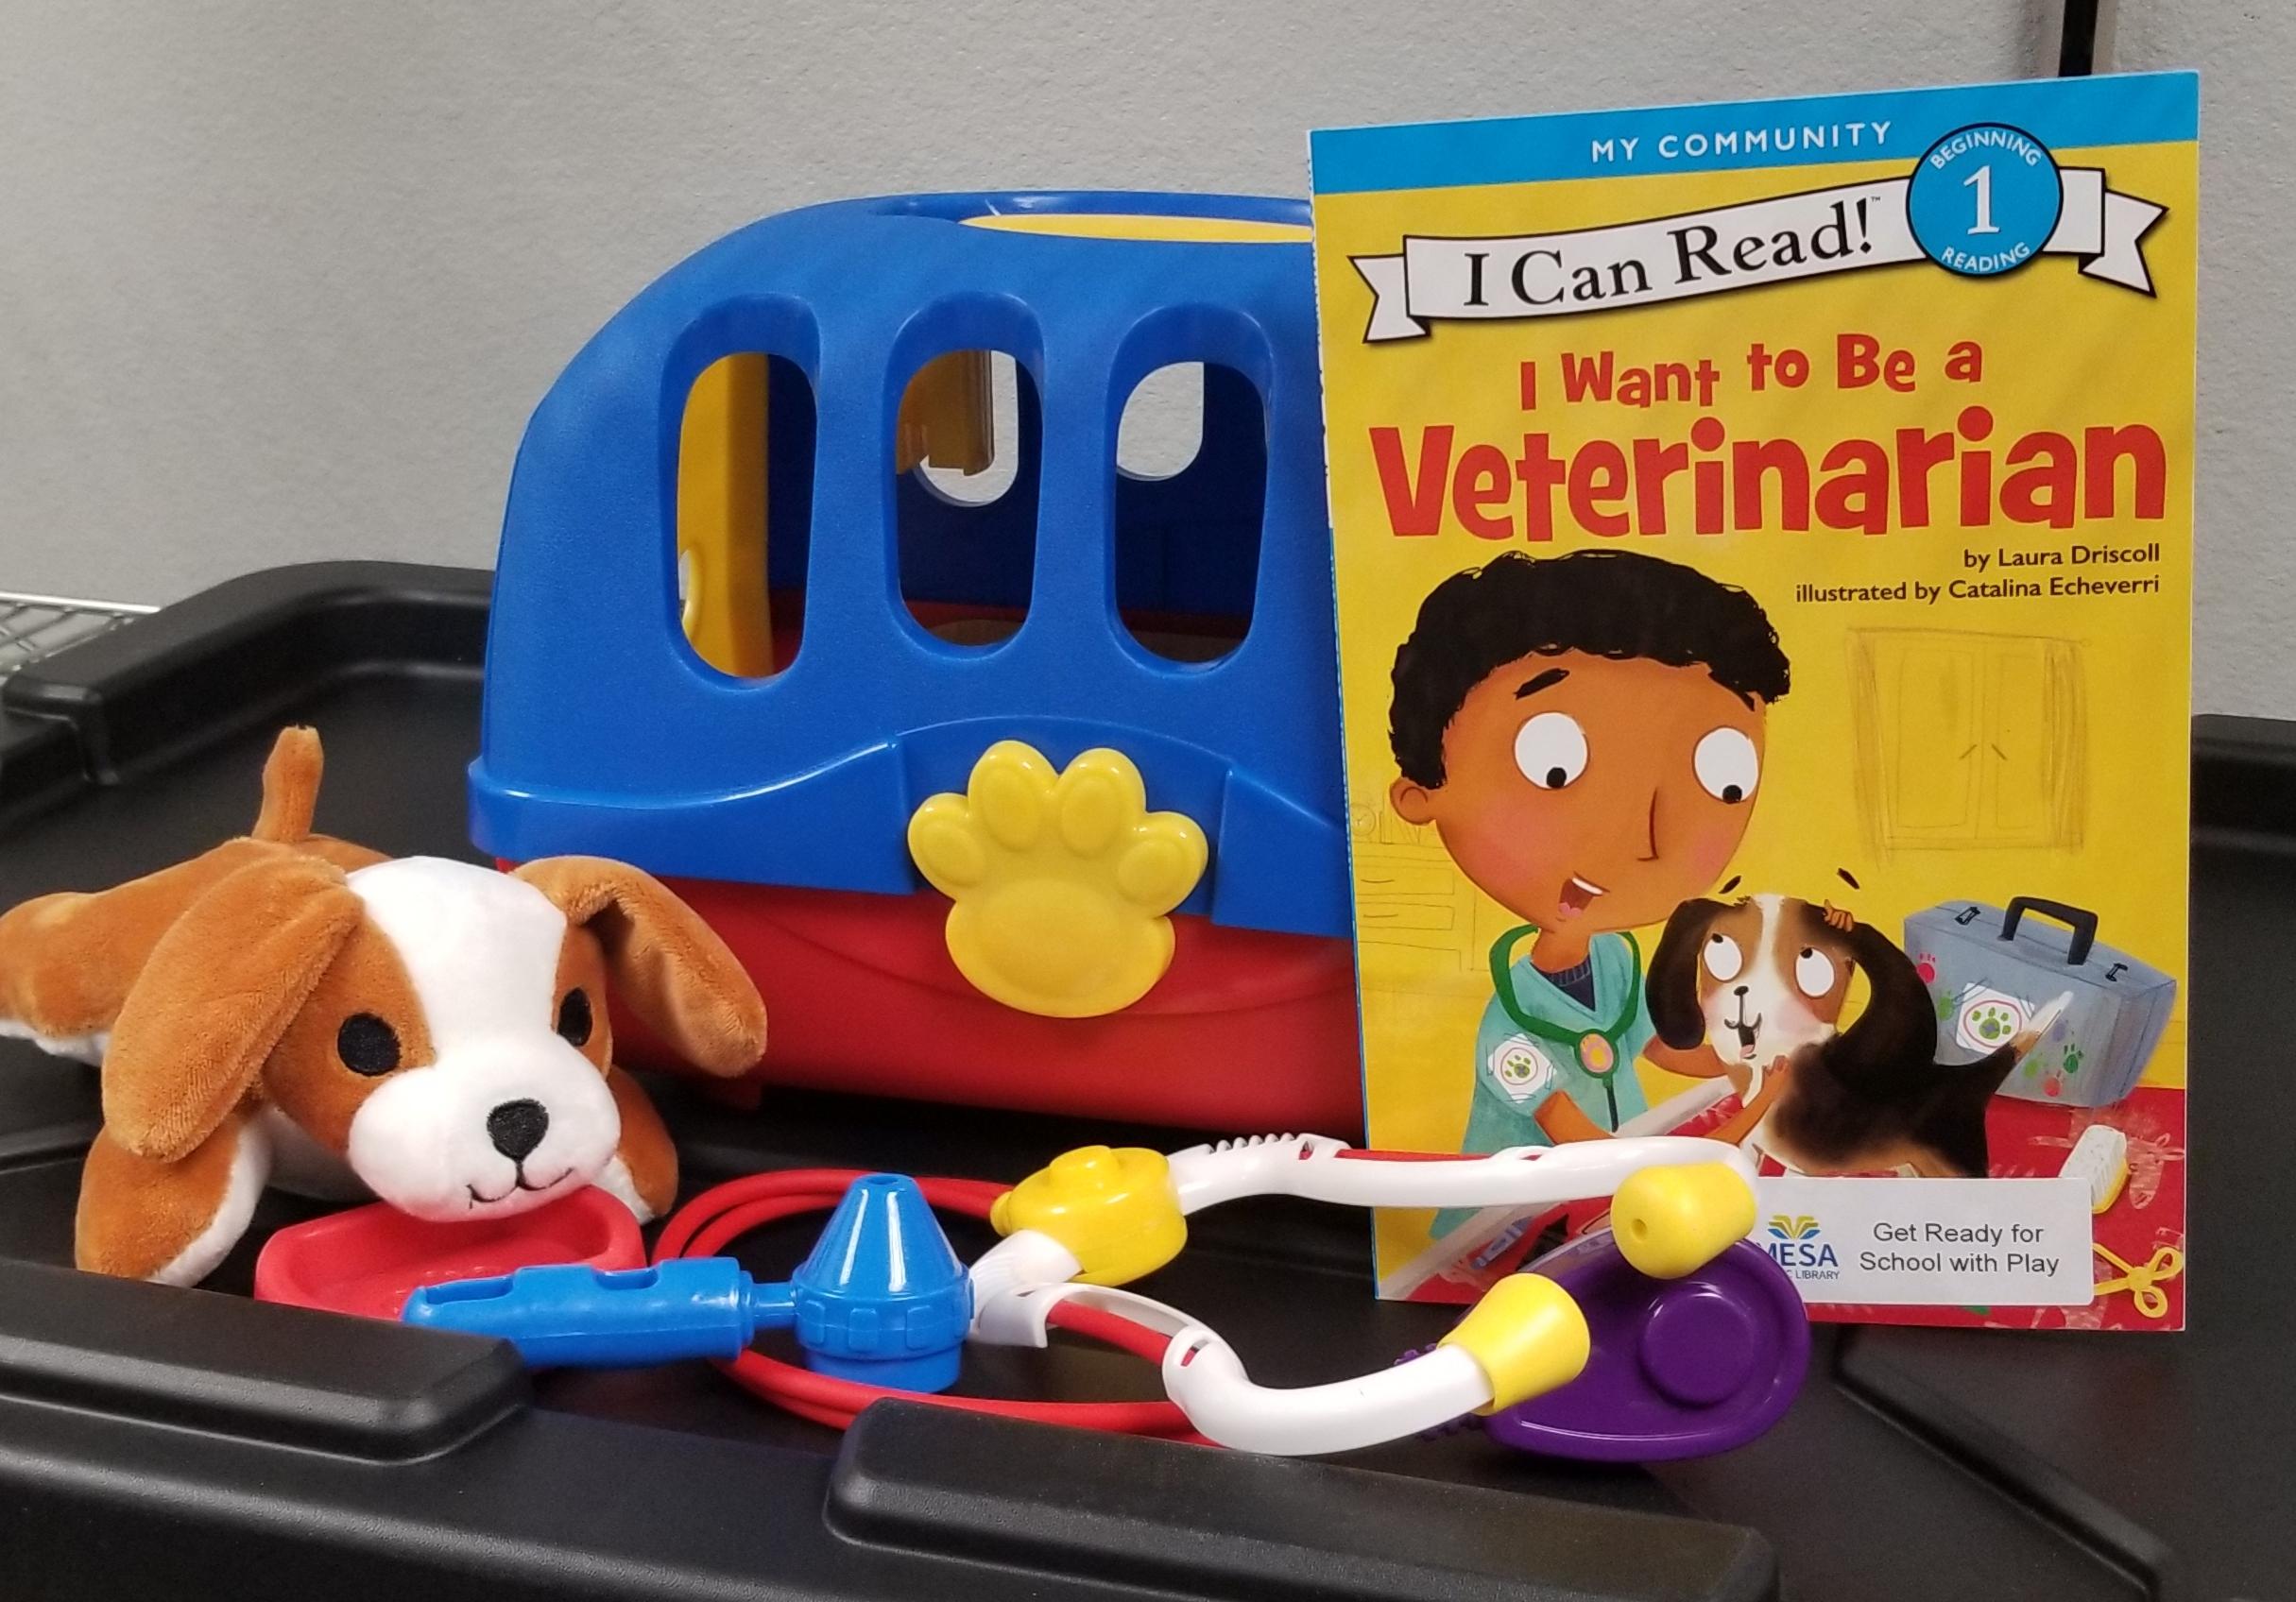 Toy veterinarian kit with copy of "I Want to be a Veterinarian"